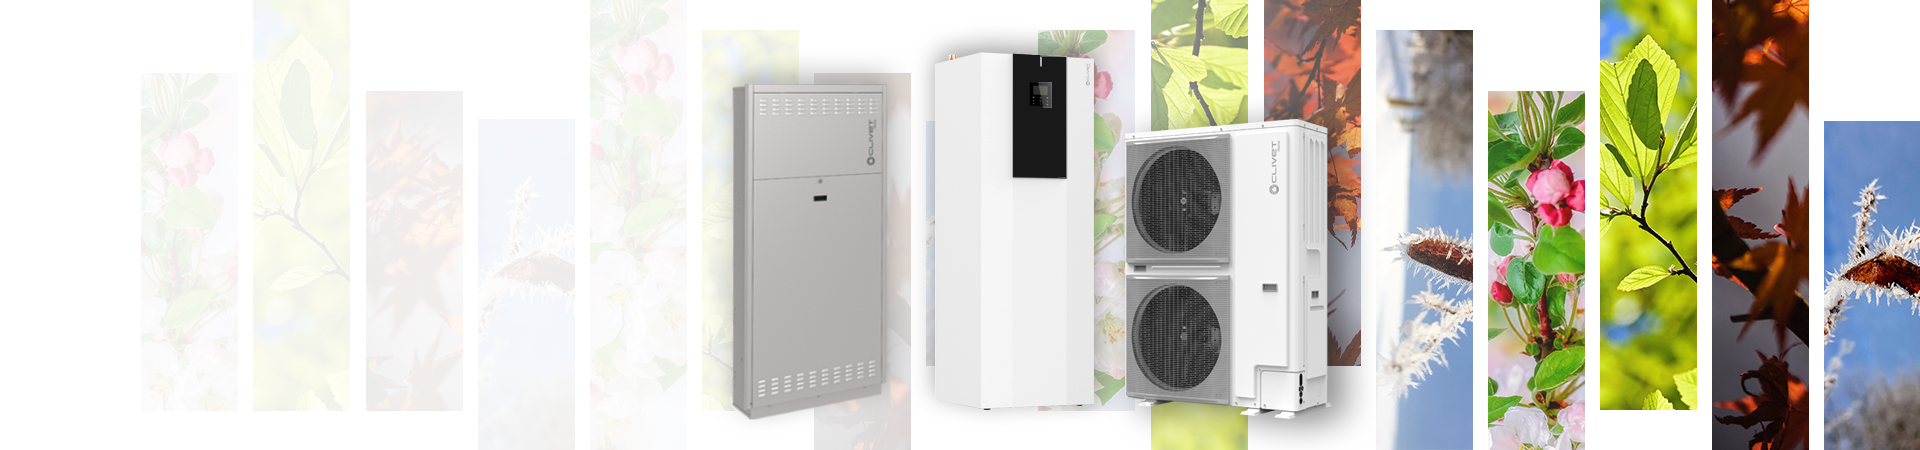 Heat pump: heating and cooling